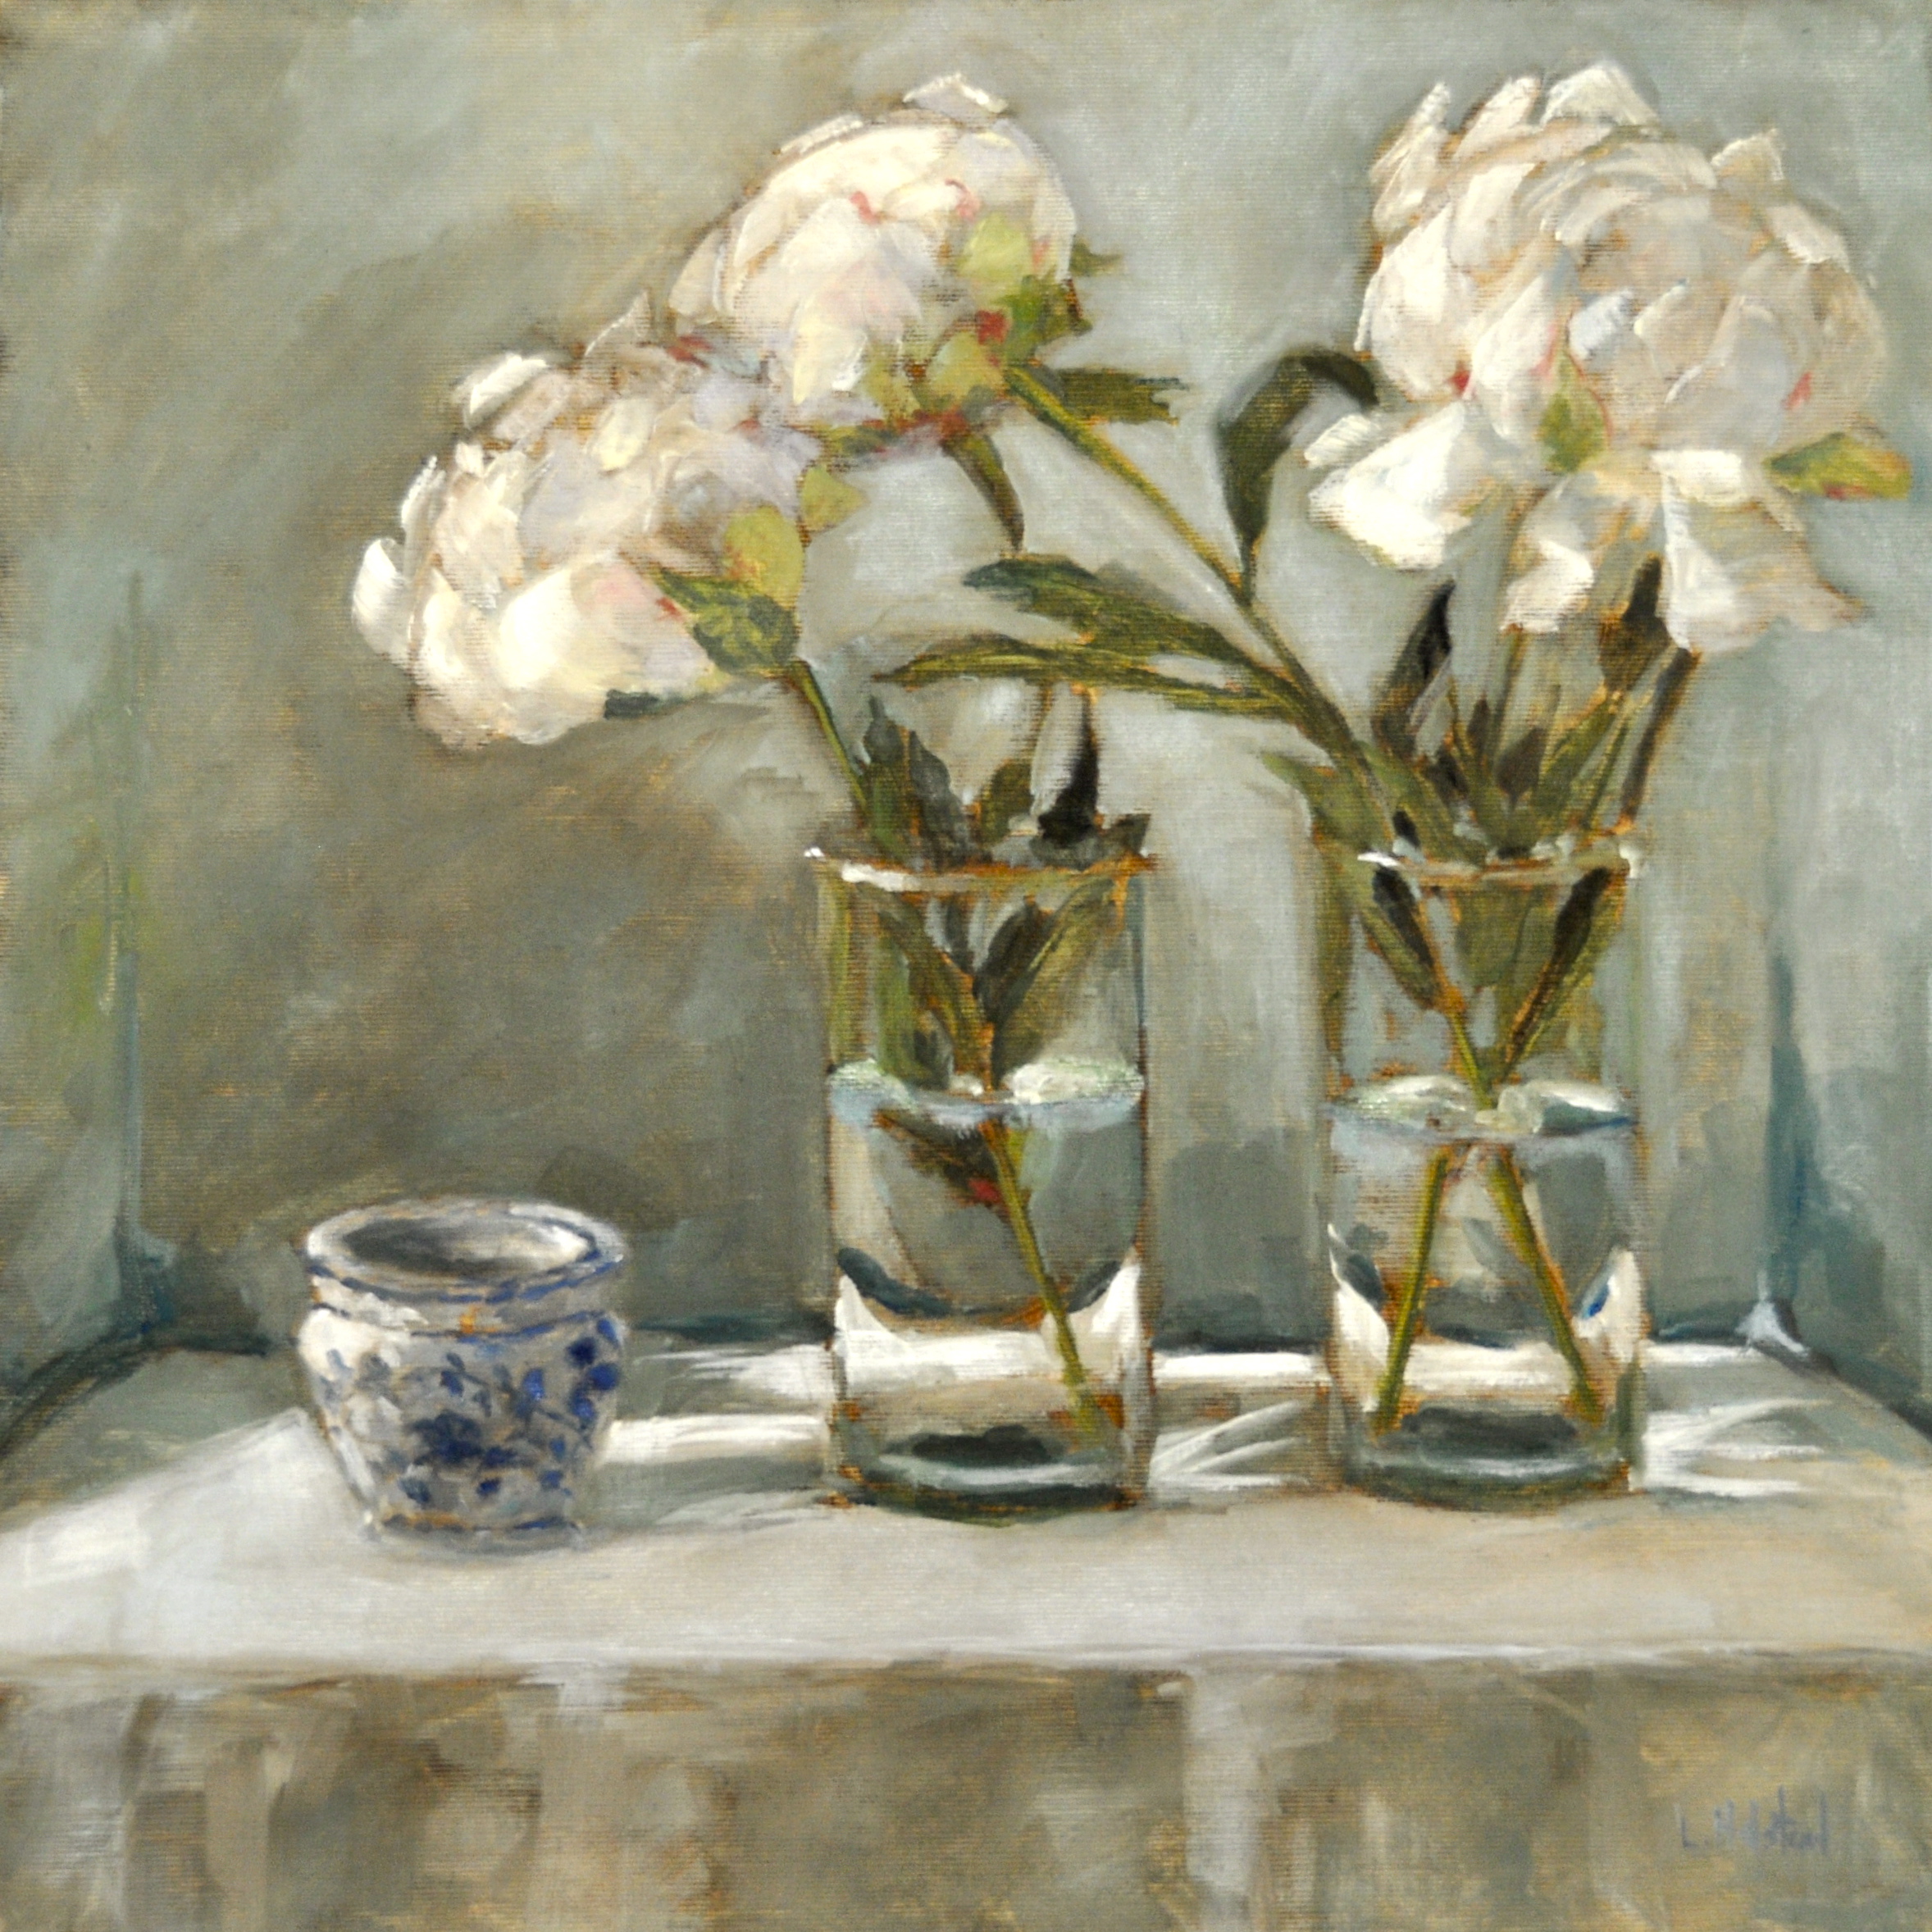 Three Peonies, Oil on Linen, 20 x 20, private collection